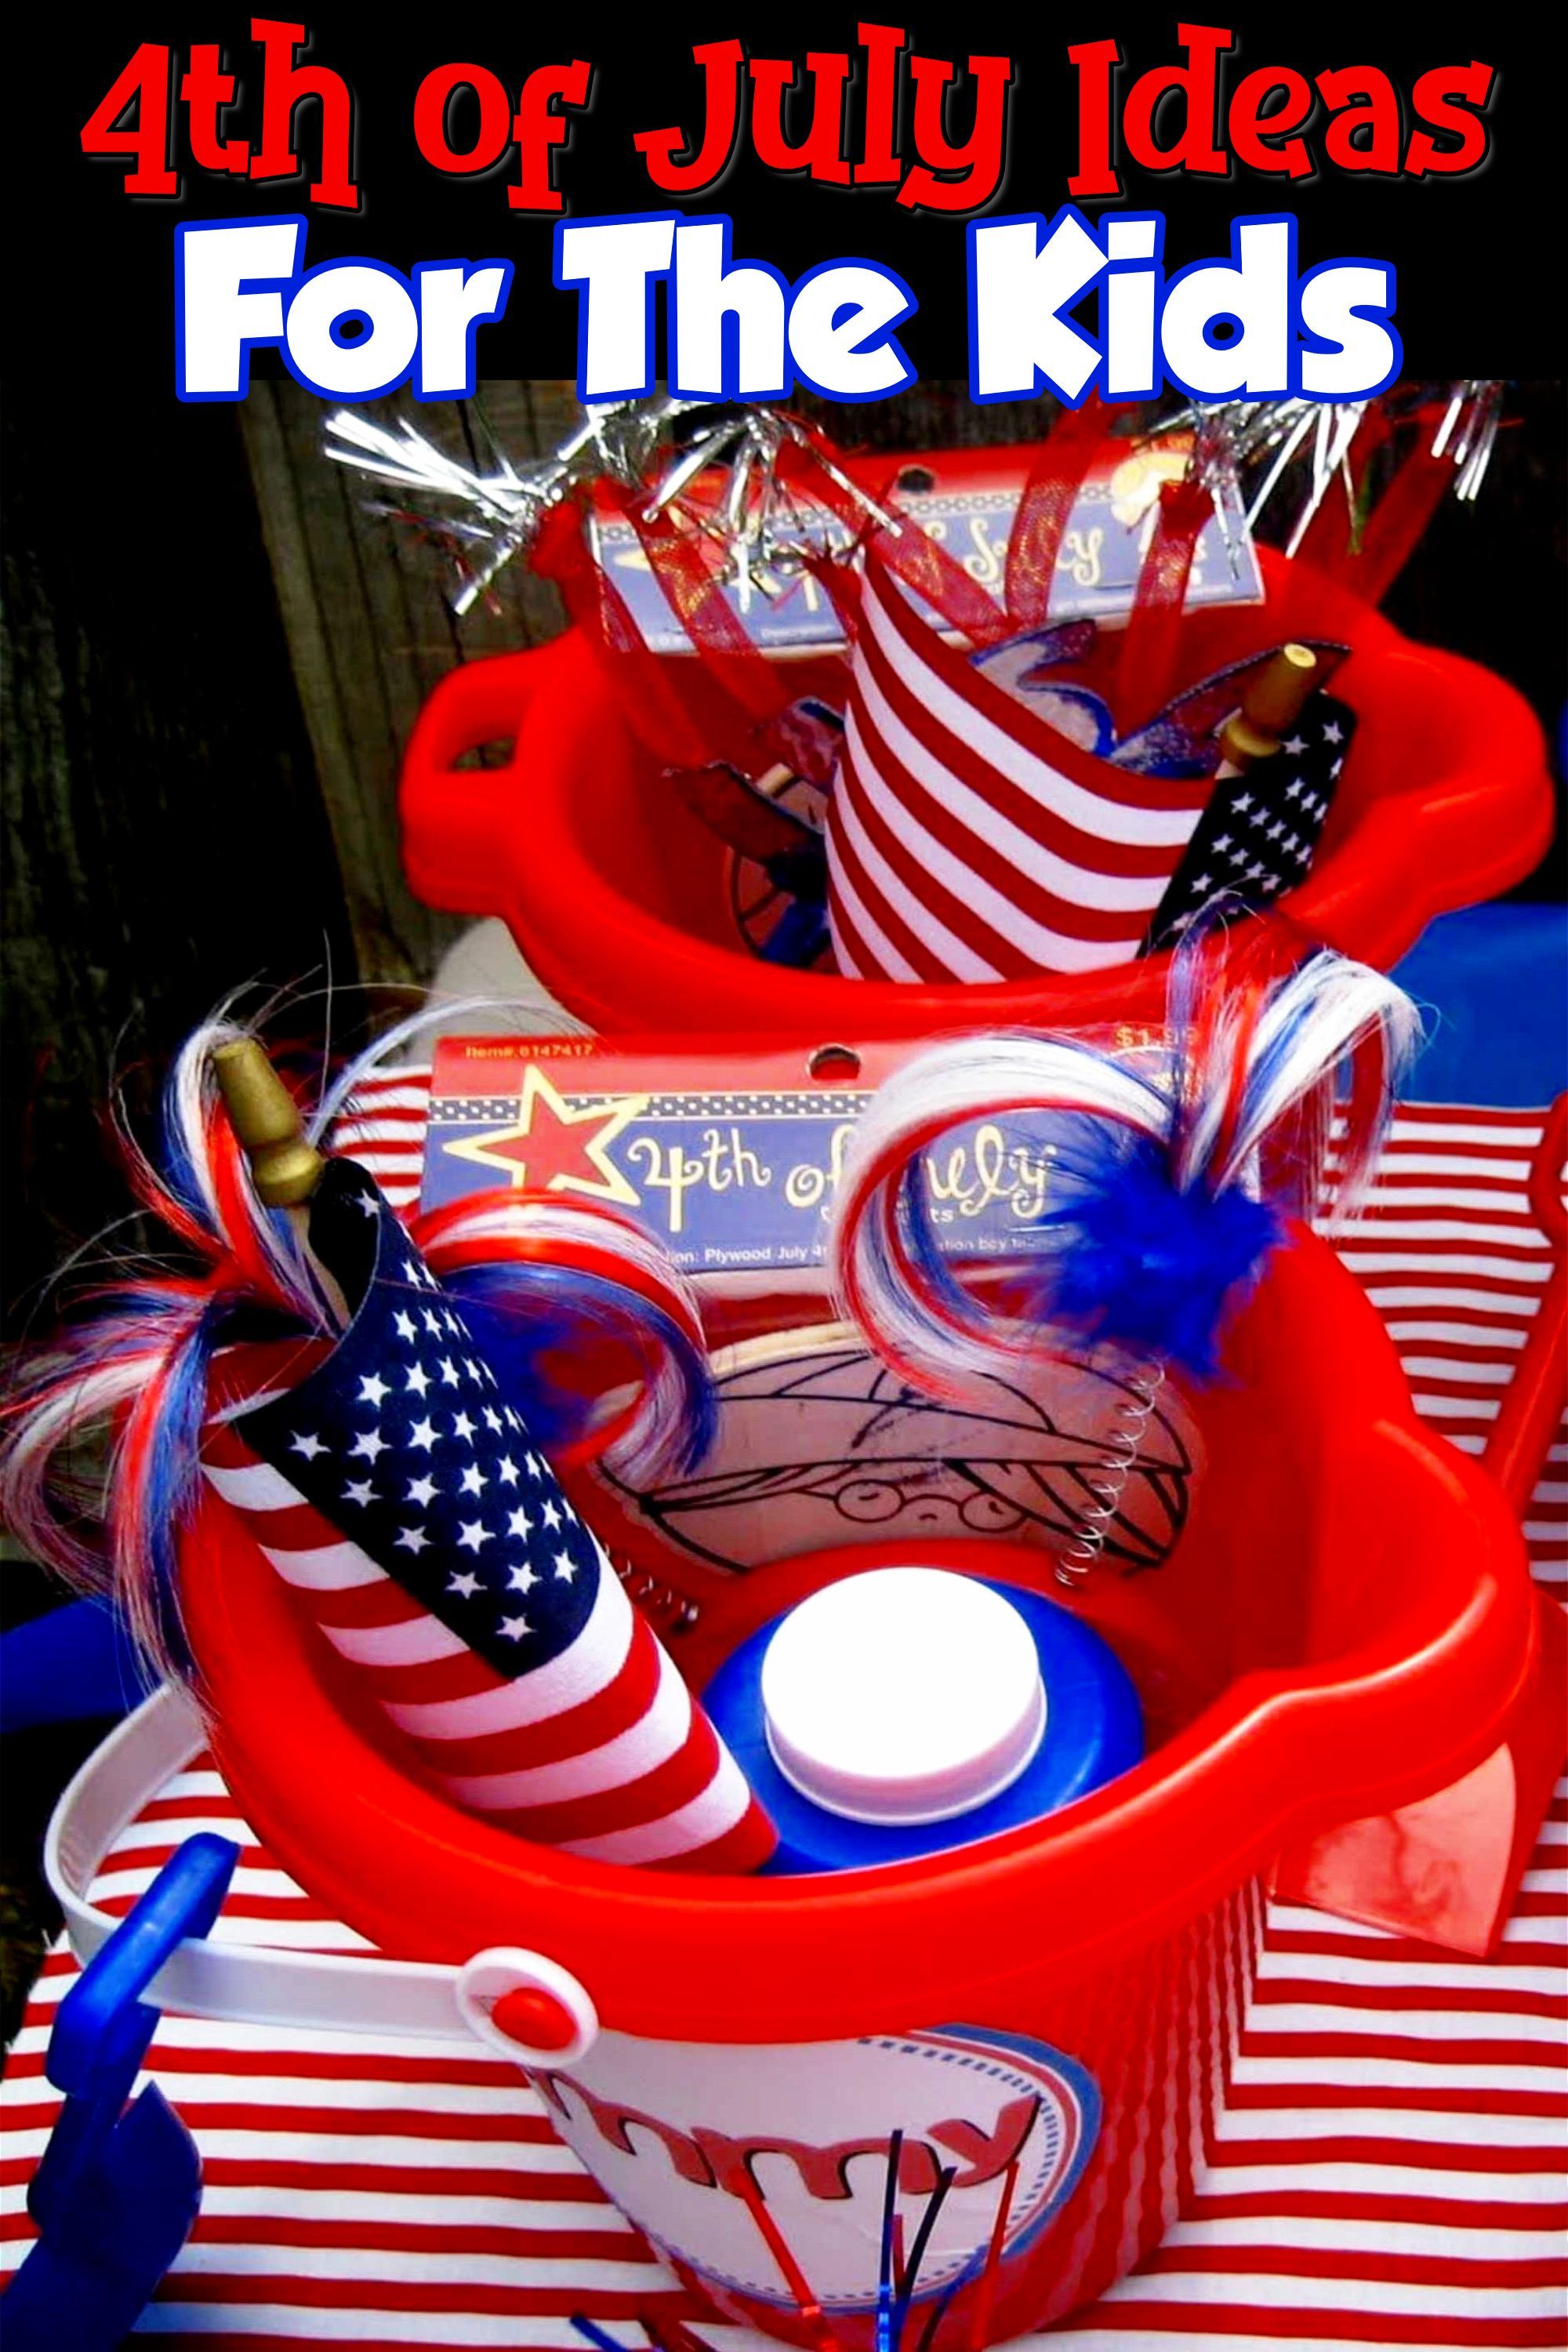 4th of July Party Ideas - Clever DIY Ideas -   18 4th of july party ideas